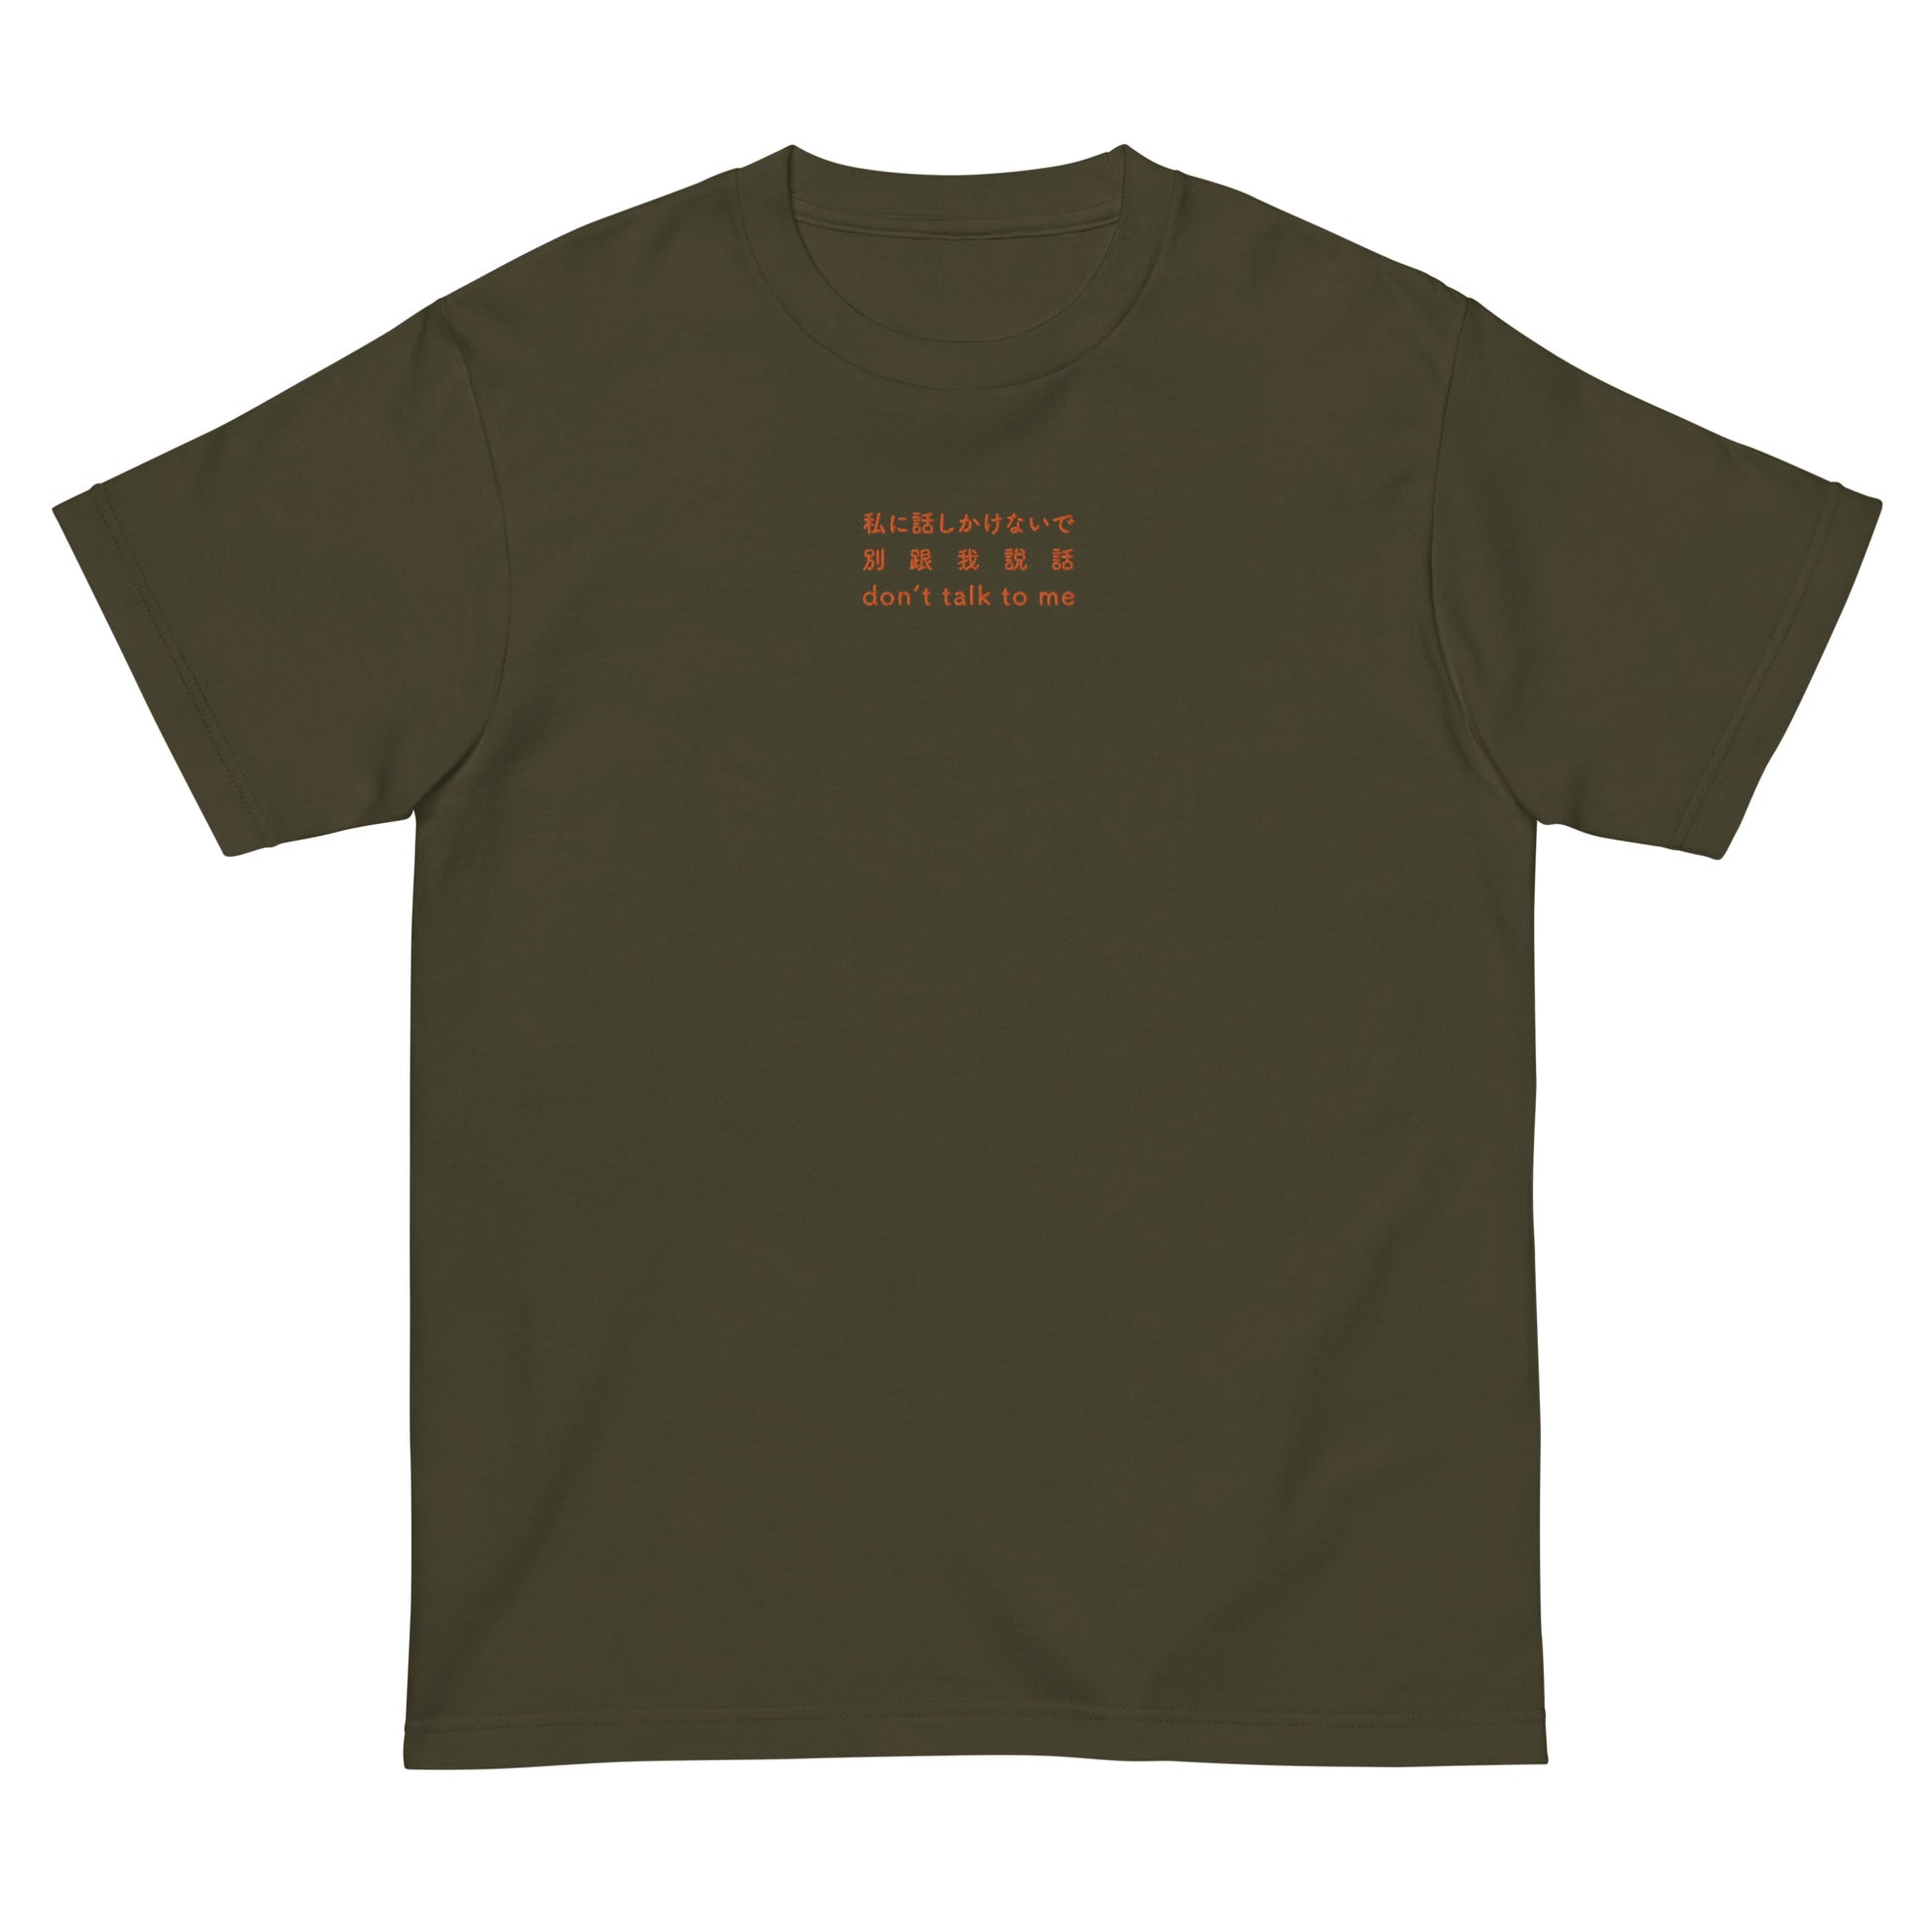 Green High Quality Tee - Front Design with an Orange Embroidery "don't talk to me" in Japanese,Chinese and English